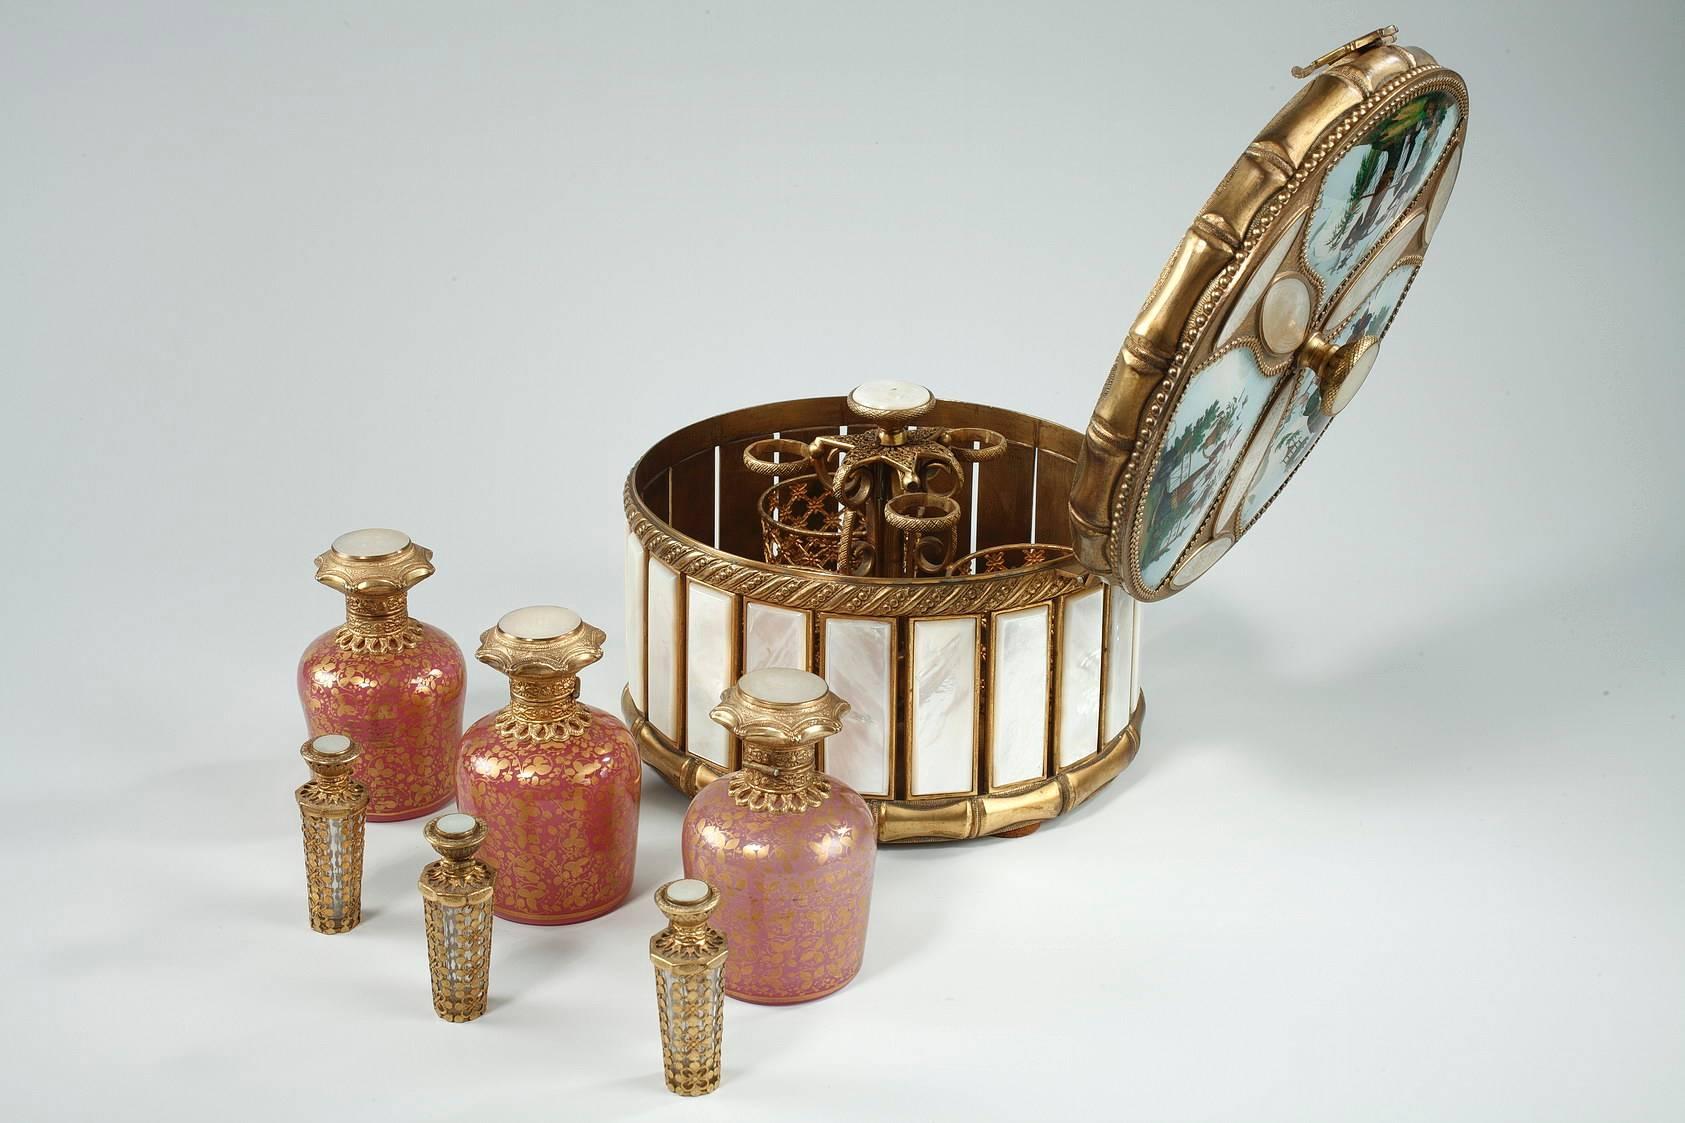 Round perfume box containing six flasks. The three larger flasks are in pink opaline accented with gold foliage, and the other three smaller flasks are in crystal and gilt bronze that is decorated with openwork floral motifs. The body of the box is